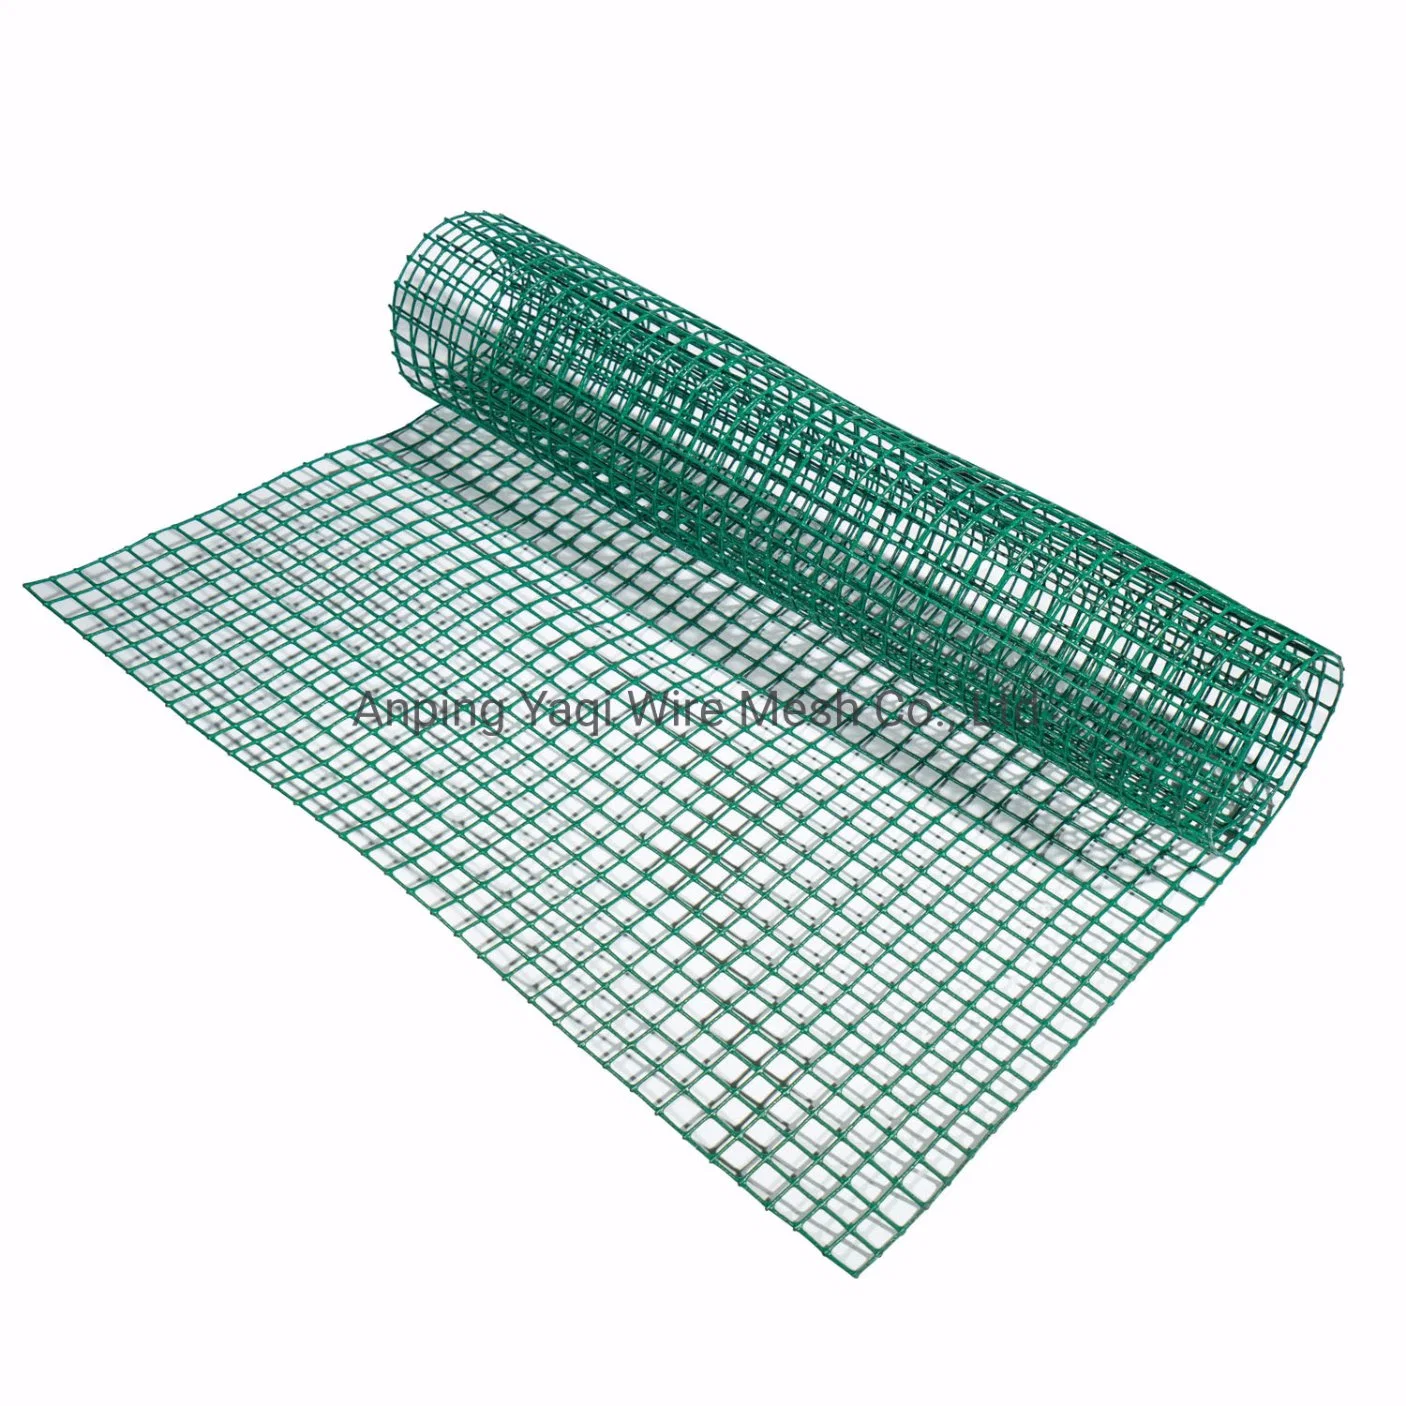 1/2" 3/4" Hot DIP Galvanized Welded Wire Mesh Bird Cage Mesh Rabbit Mesh Roof Mesh for Agriculture